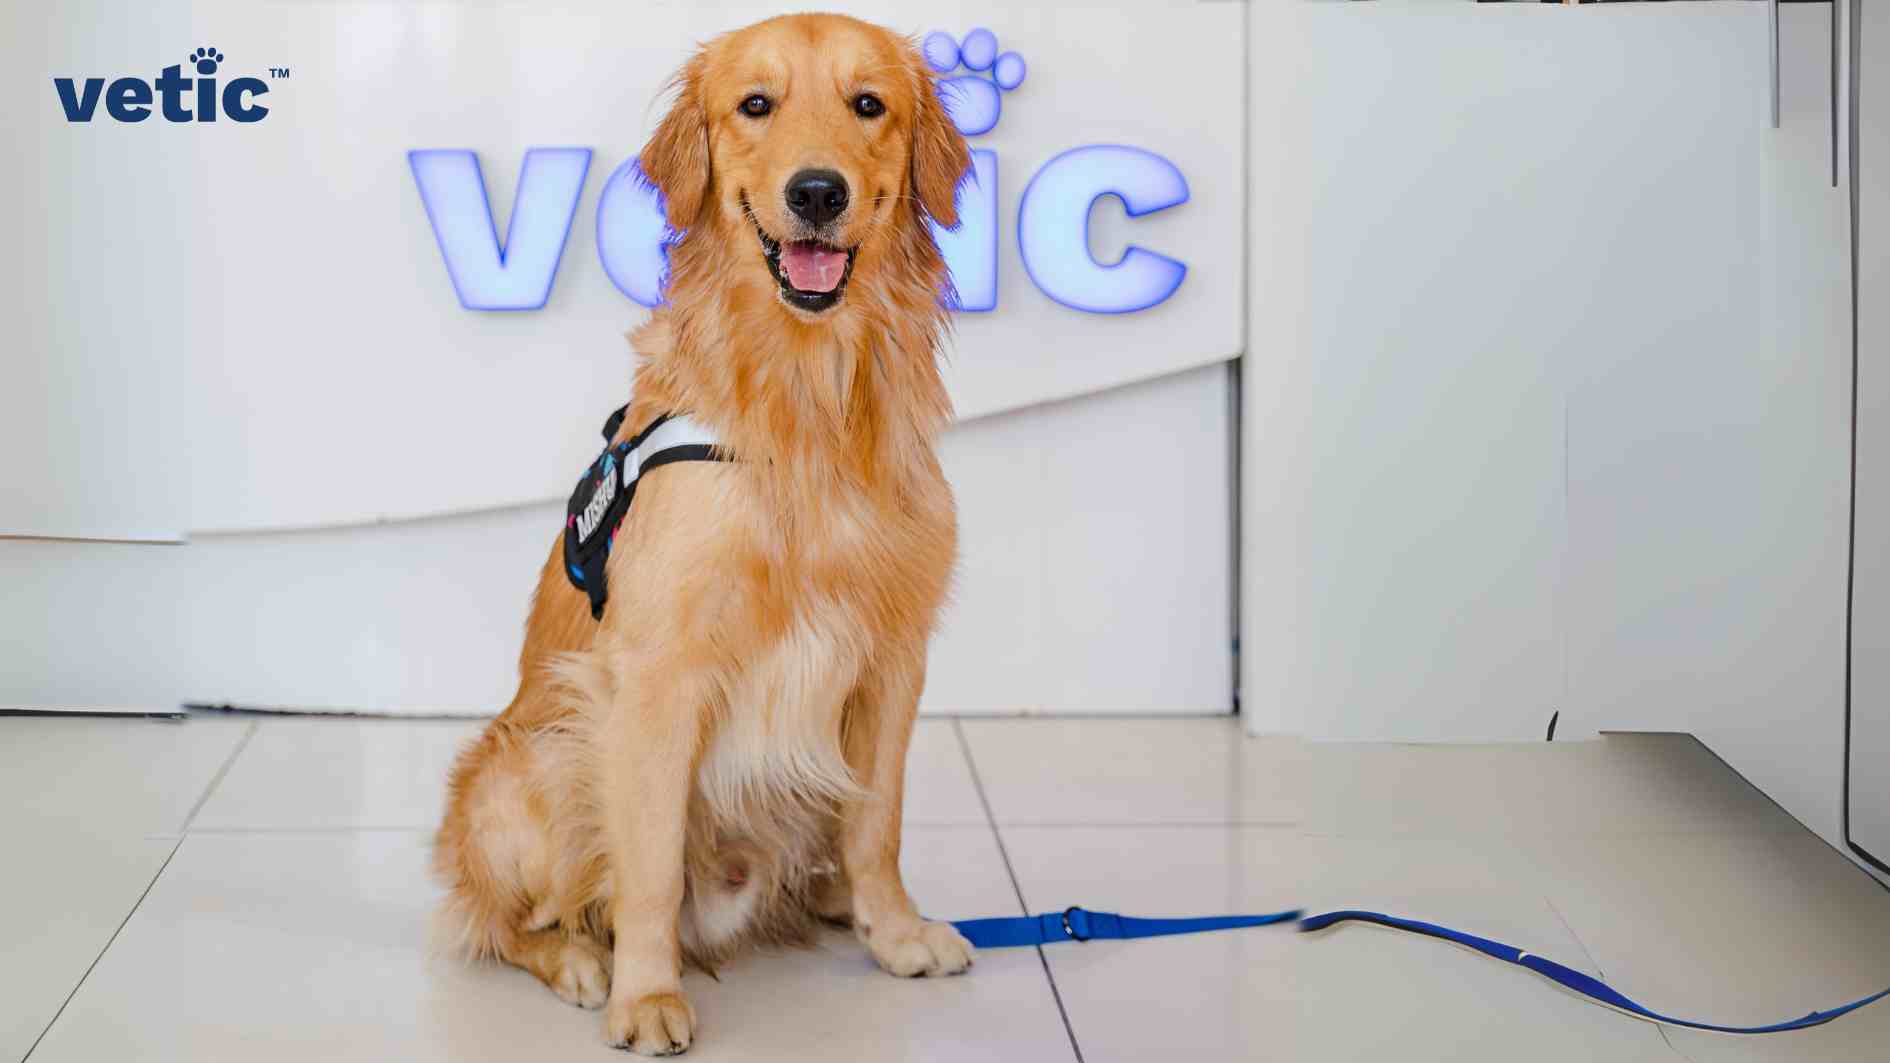 A very happy looking Golden Retriever sitting in front of a wall with the signage "Vetic". The golden retriever is wearing a multi-coloured printed harness and a blue leash. Labrador vs. Golden retriever may not be an easy choice to make since both require tons of emotional bonding and outdoor playtime